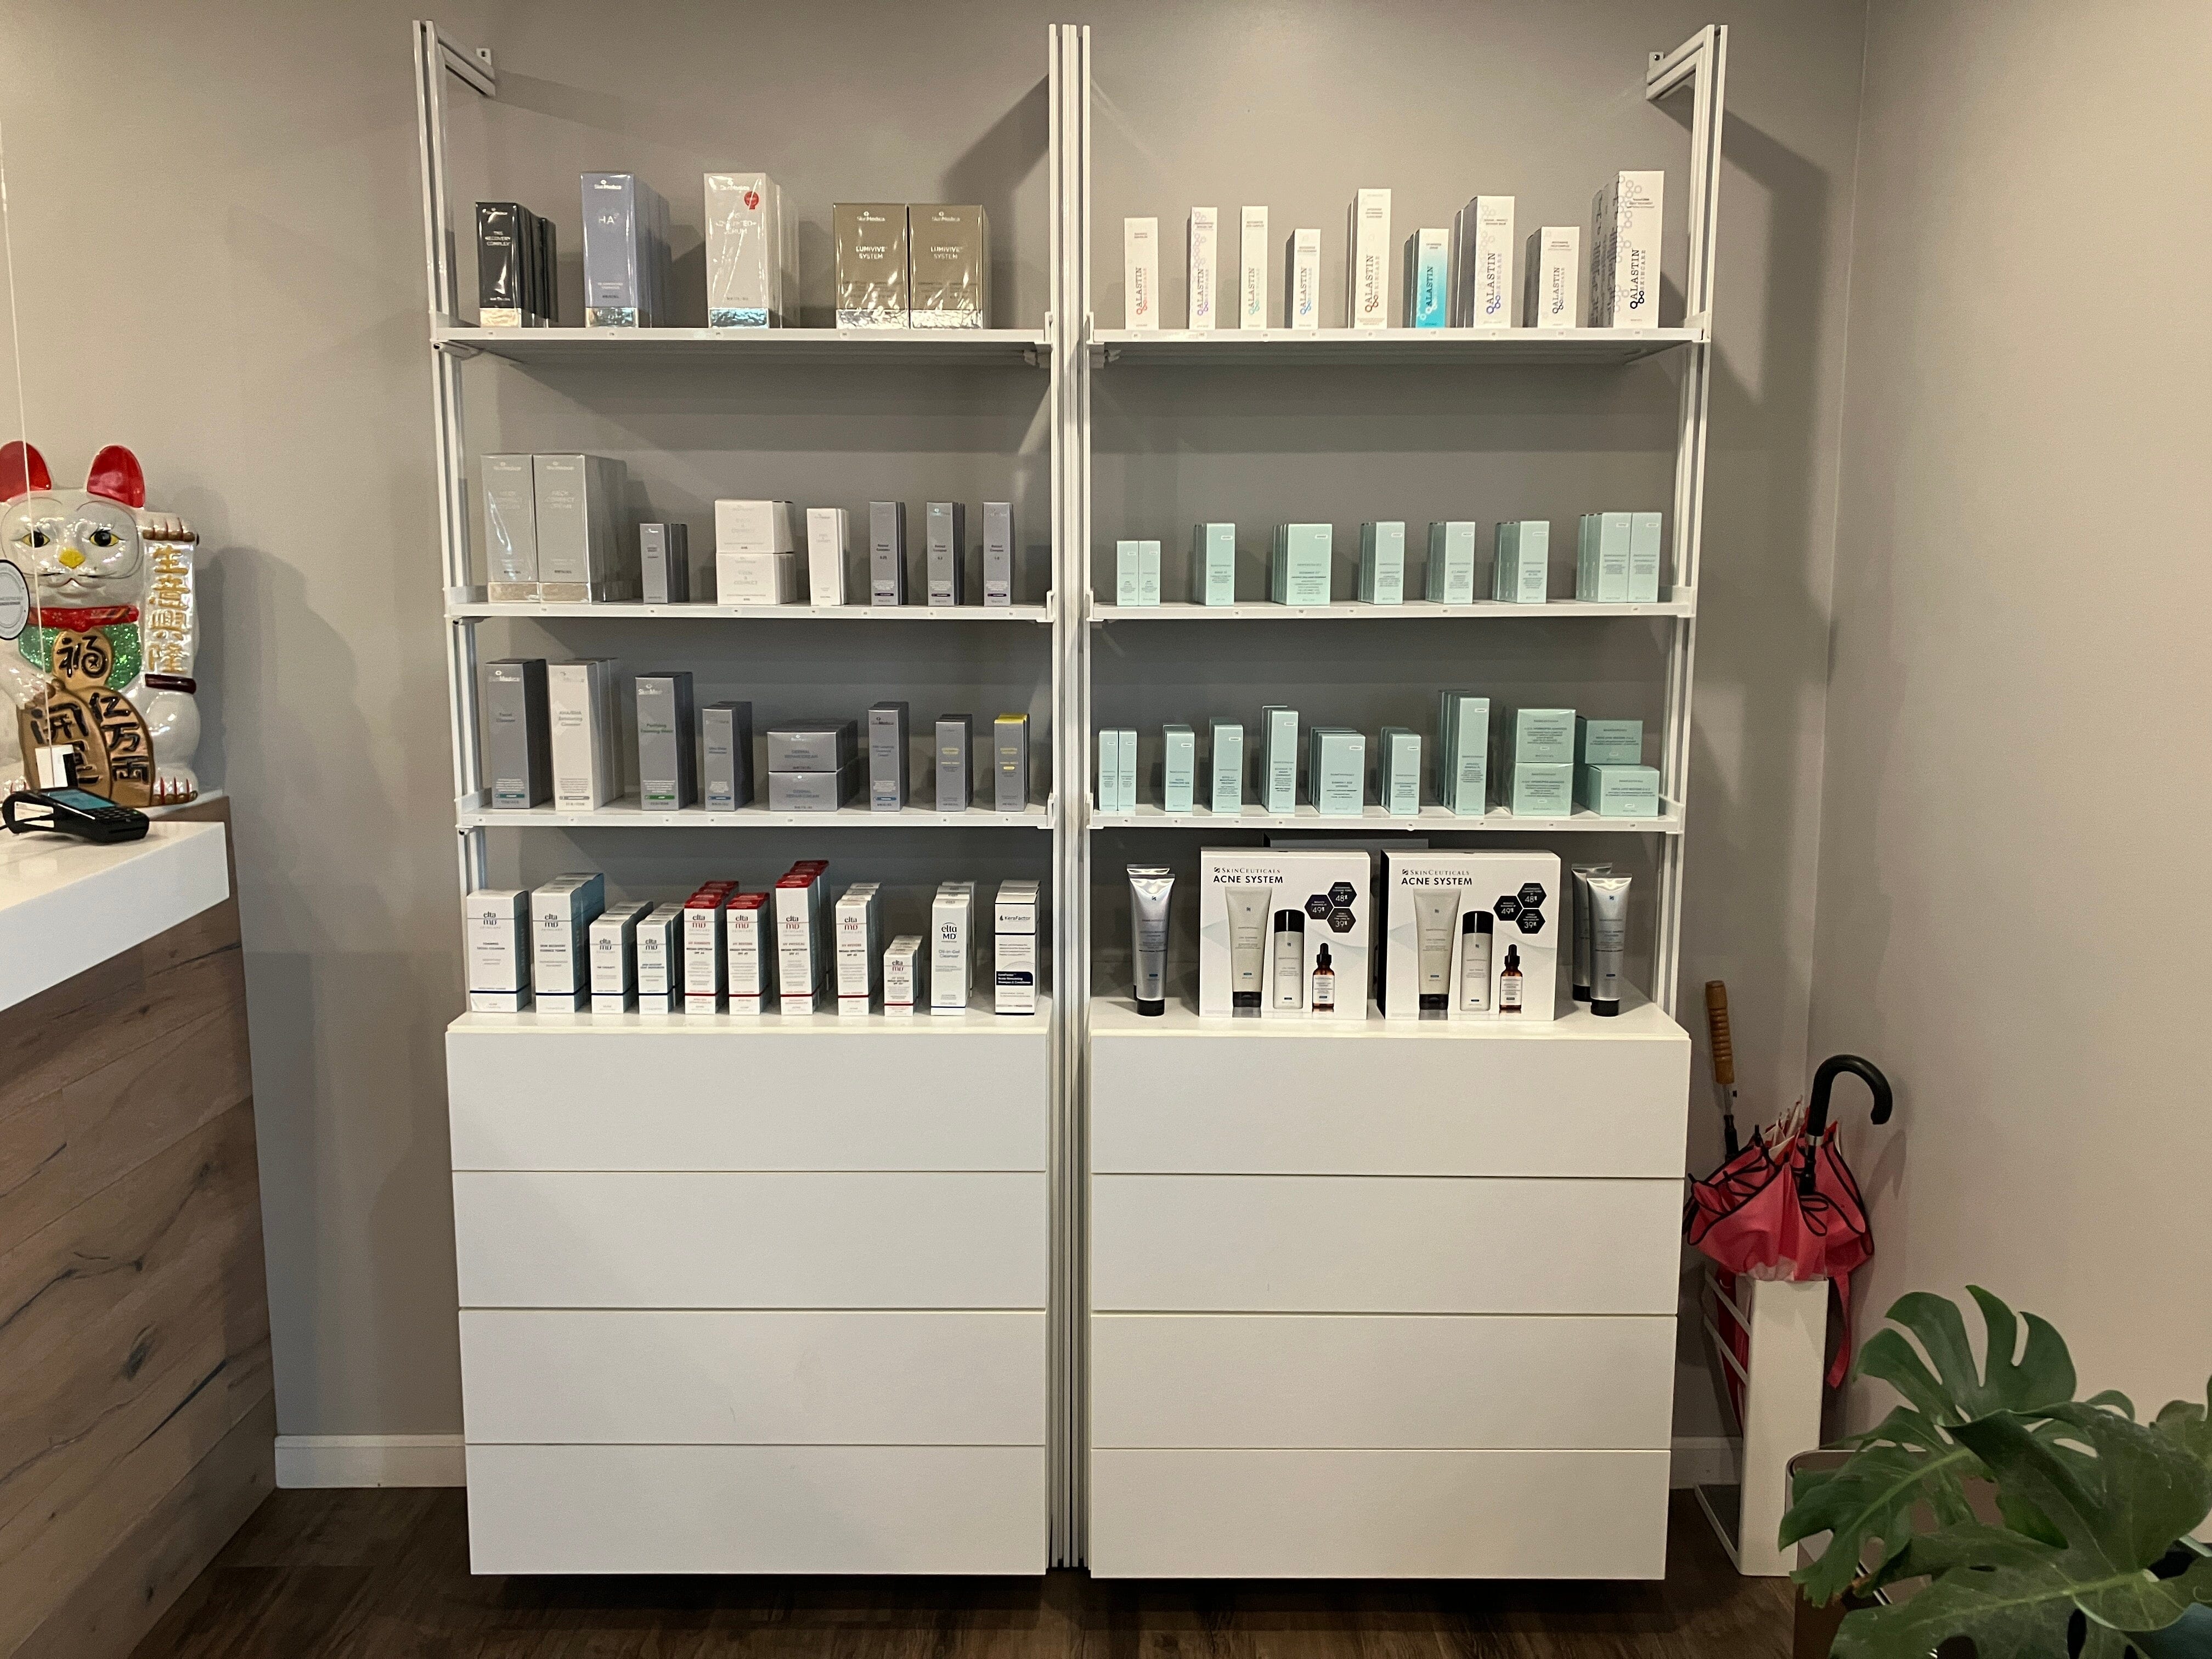 Honolulu Med Spa Uses Shelves to Display Products